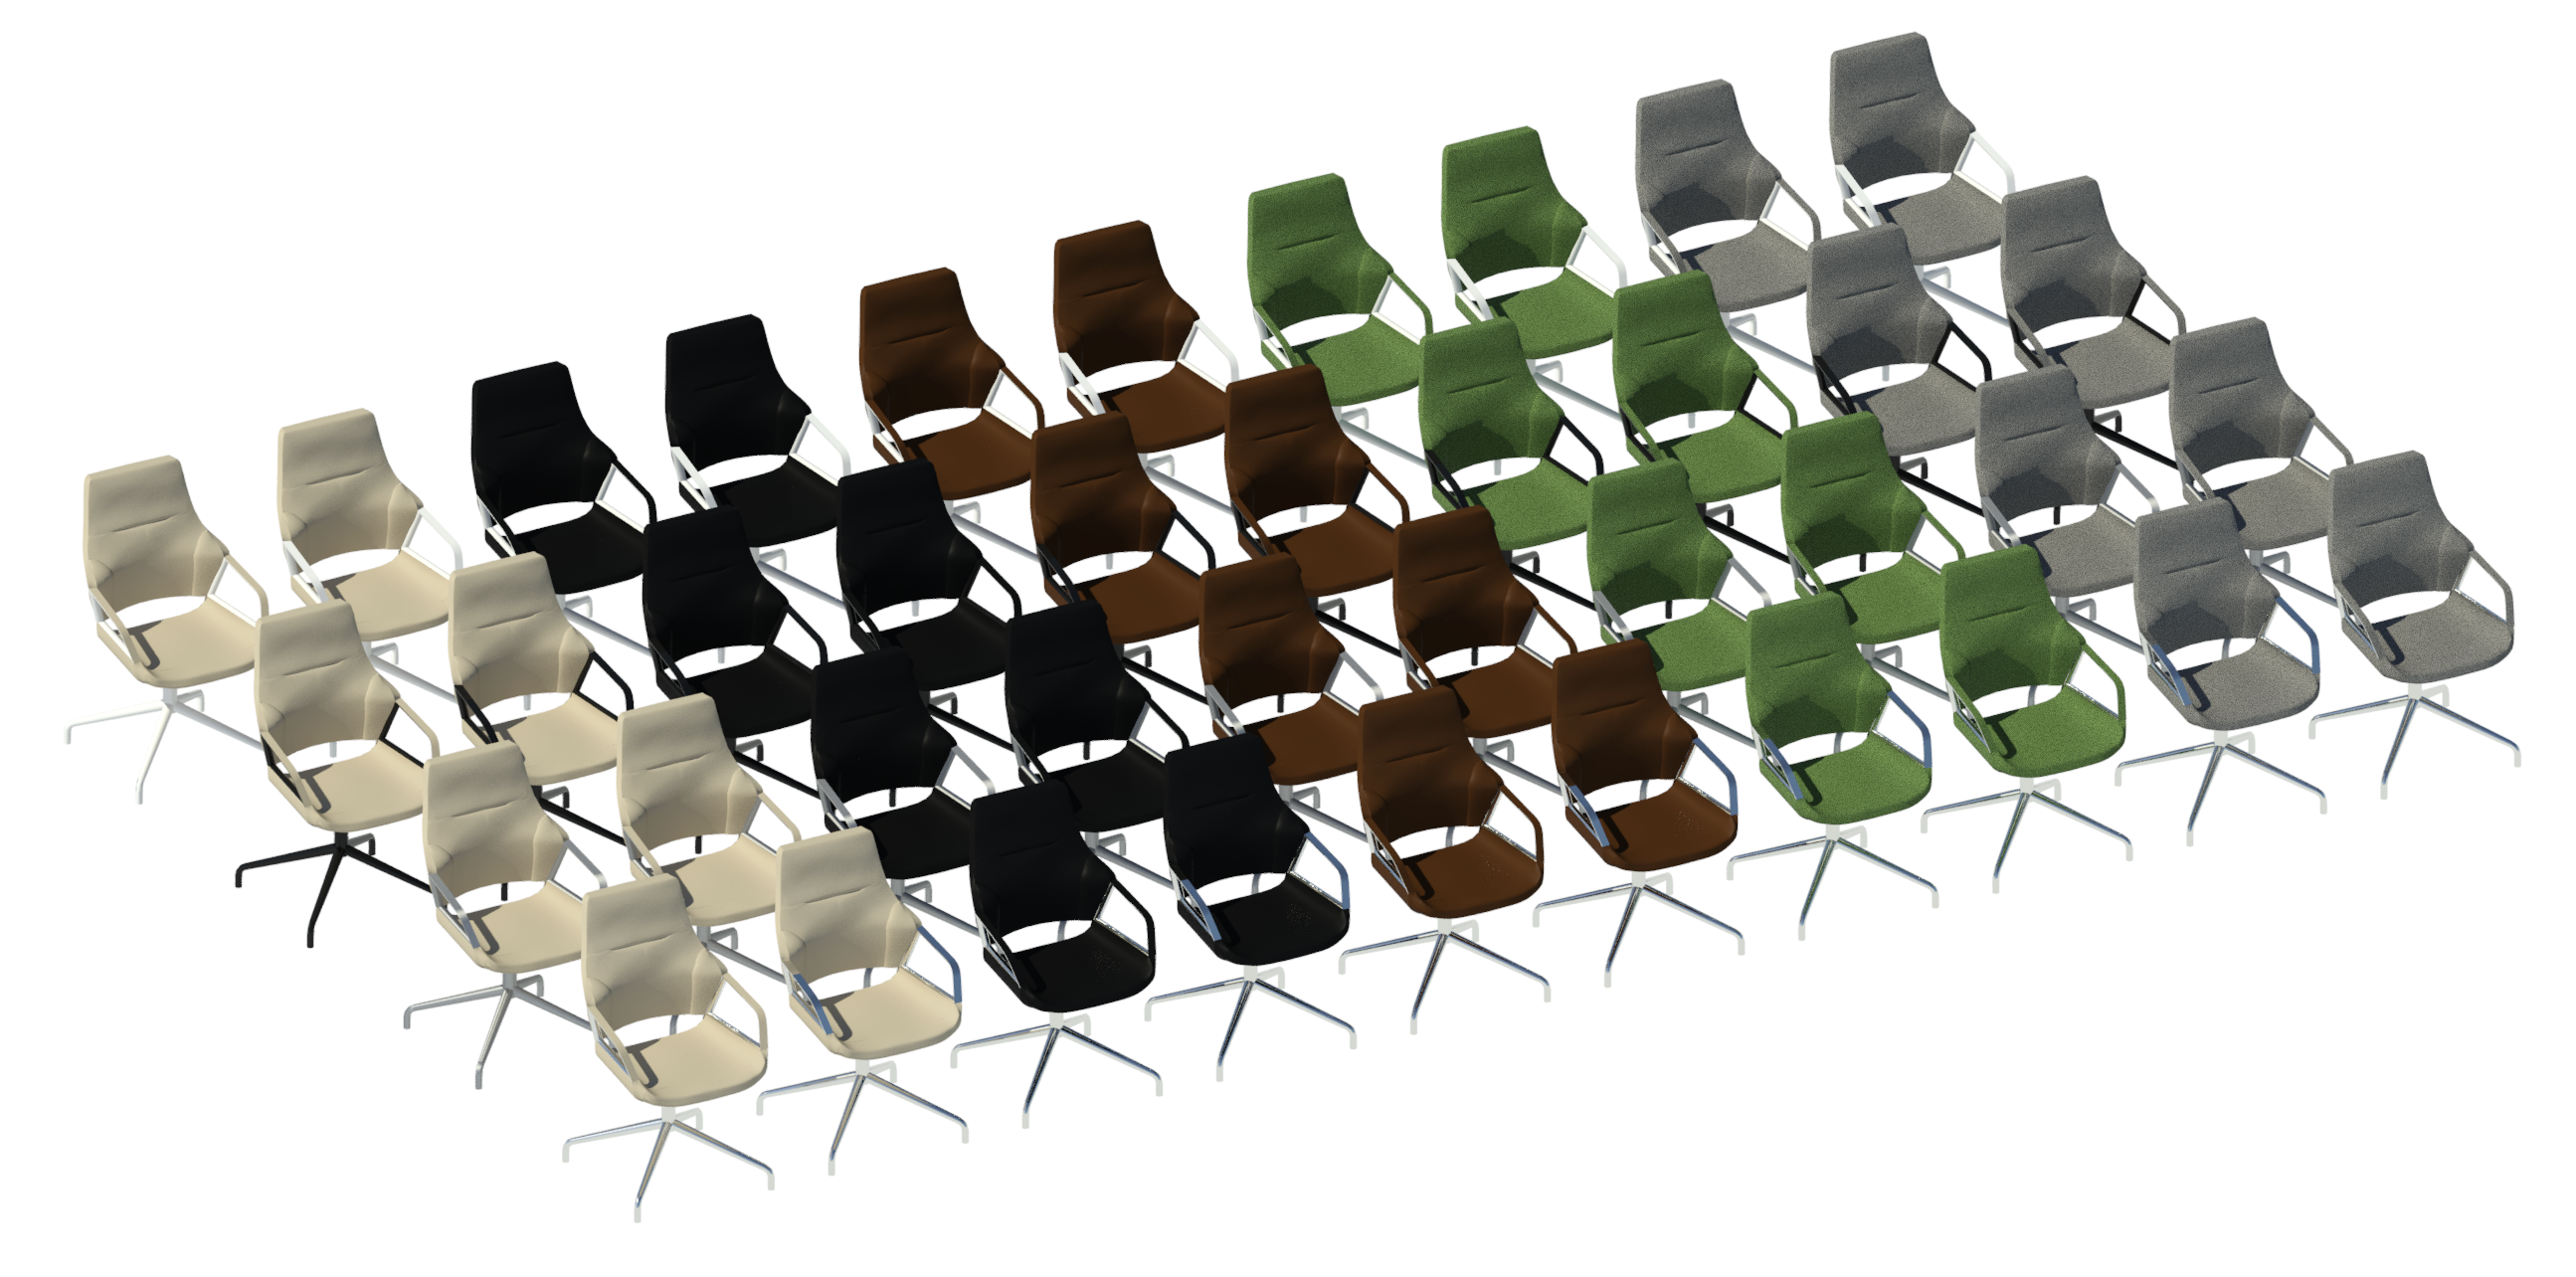 Raytrace showing all 40 types of our rebuilt Graph chair Revit family.